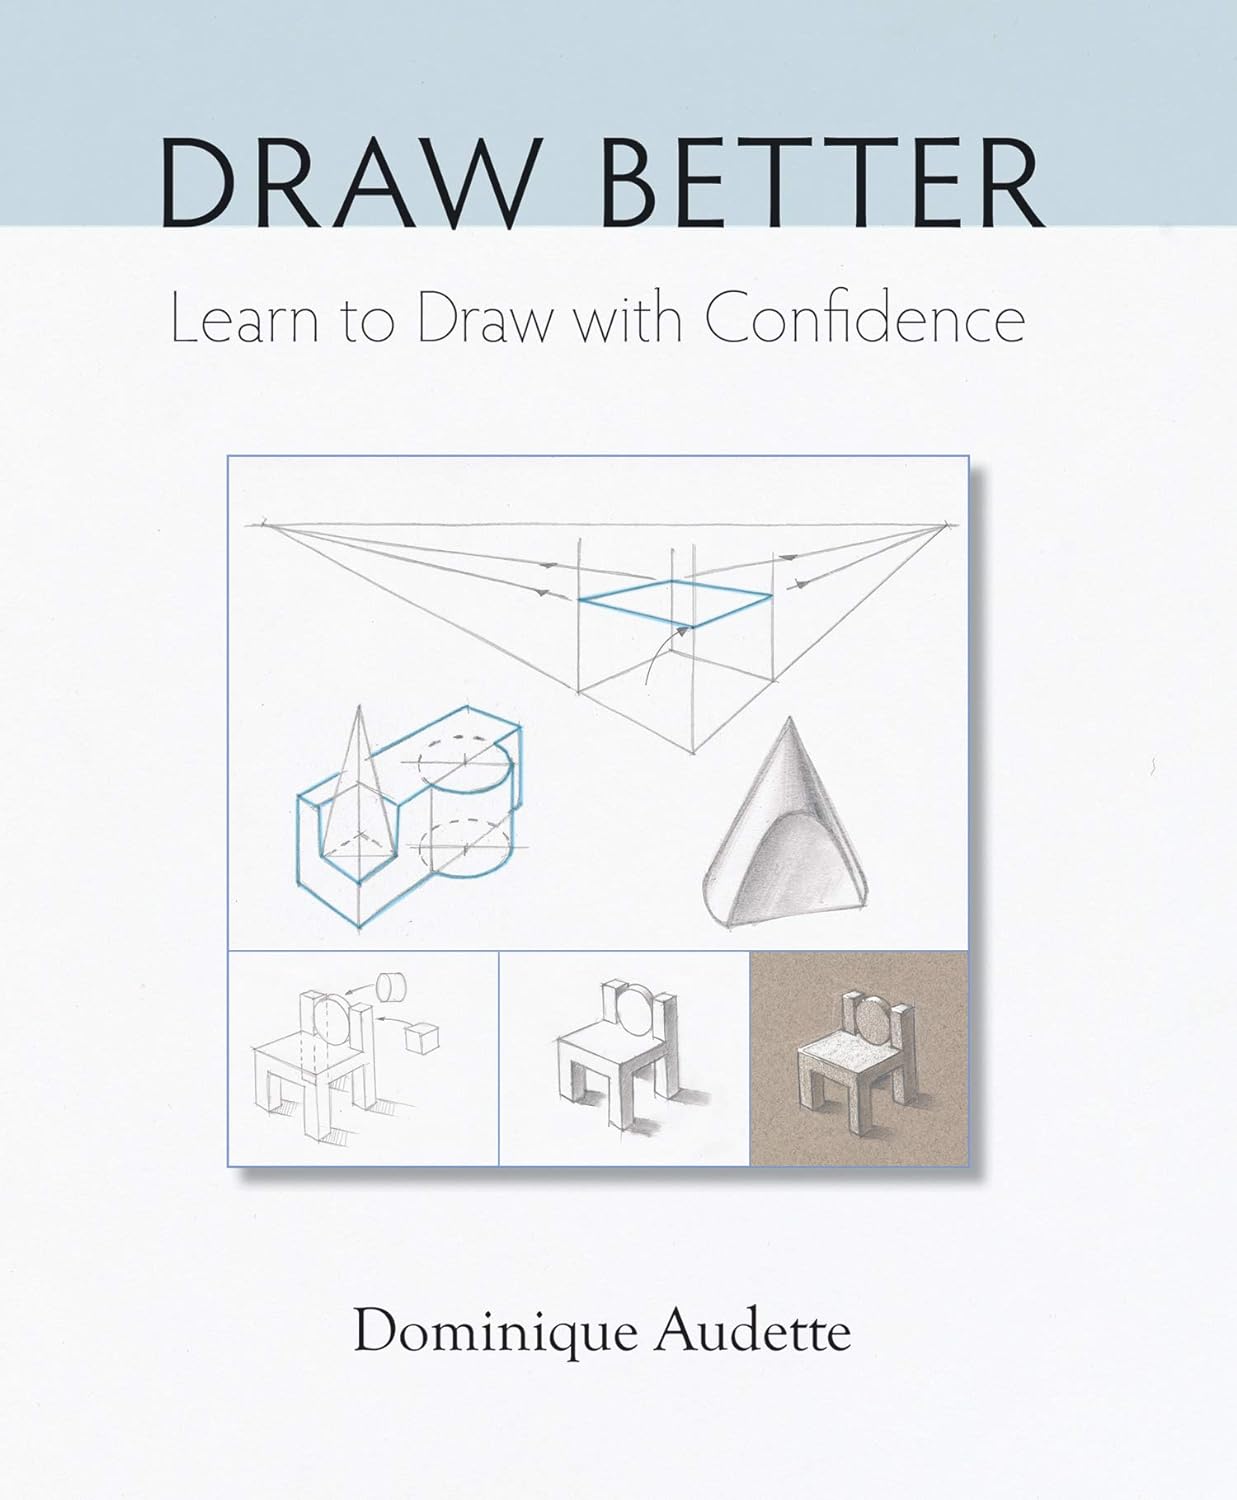 Draw Better: Learn to Draw with Confidence